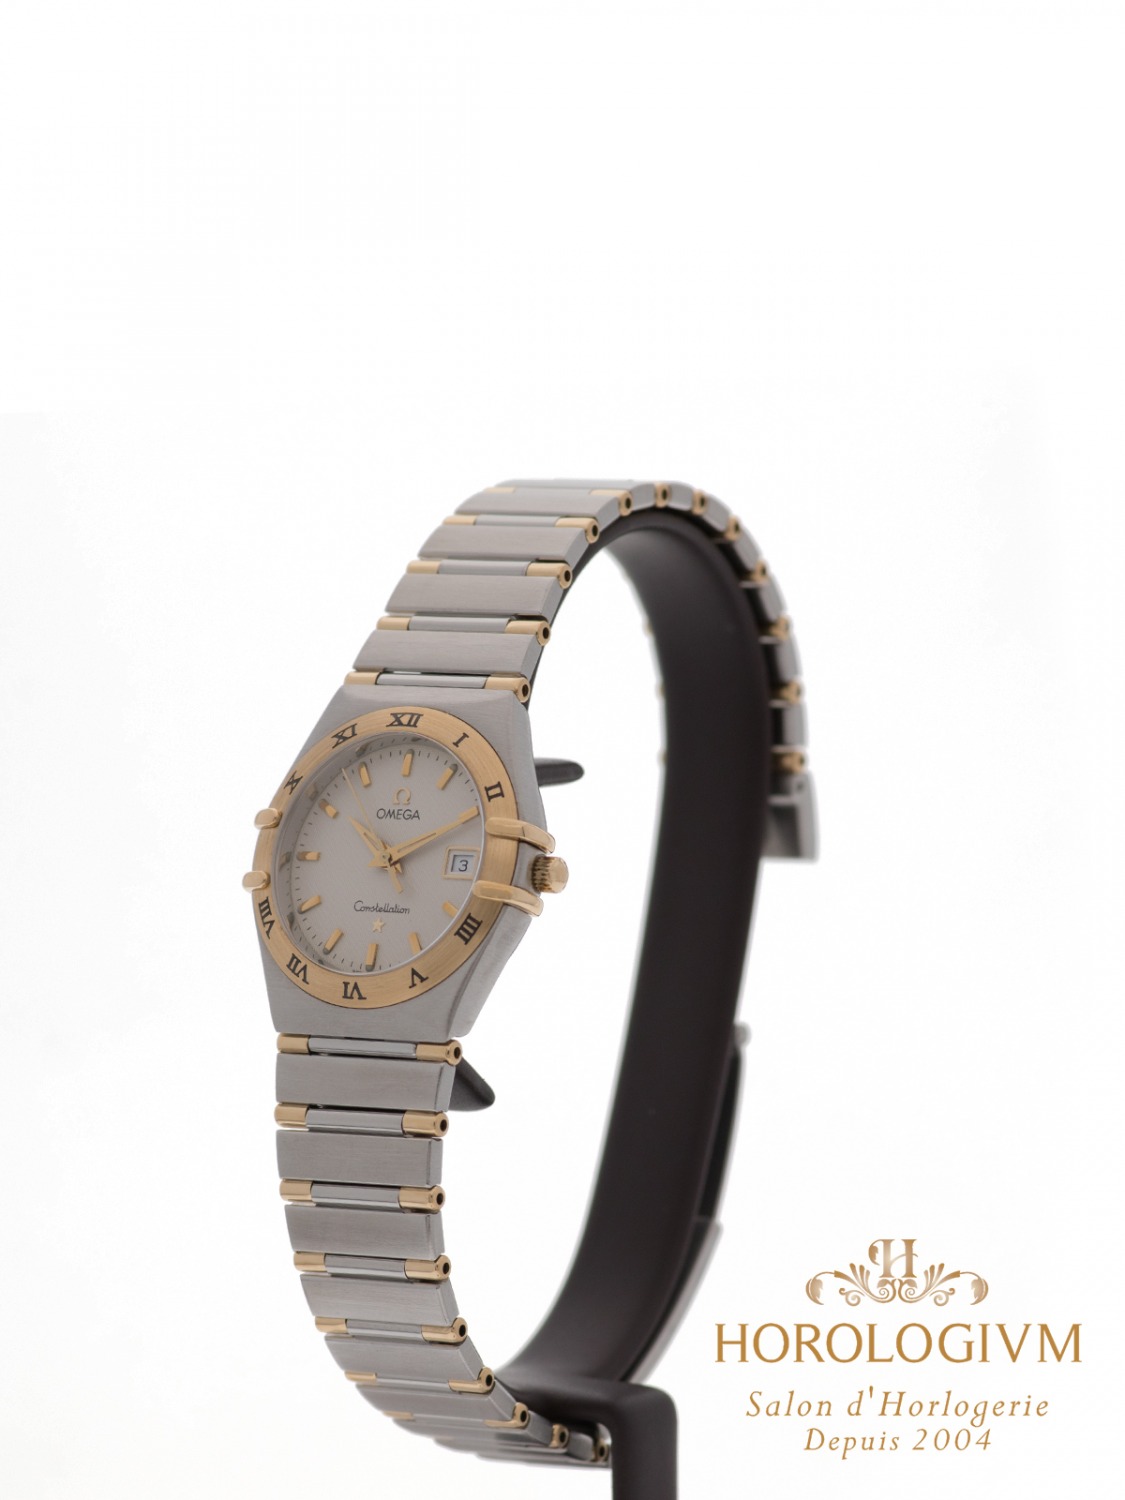 Omega Constellation Two-Tone 27.5 MM Ref. 13823000 watch, two-tone (bi-colored) silver (case) and yellow gold (bezel)